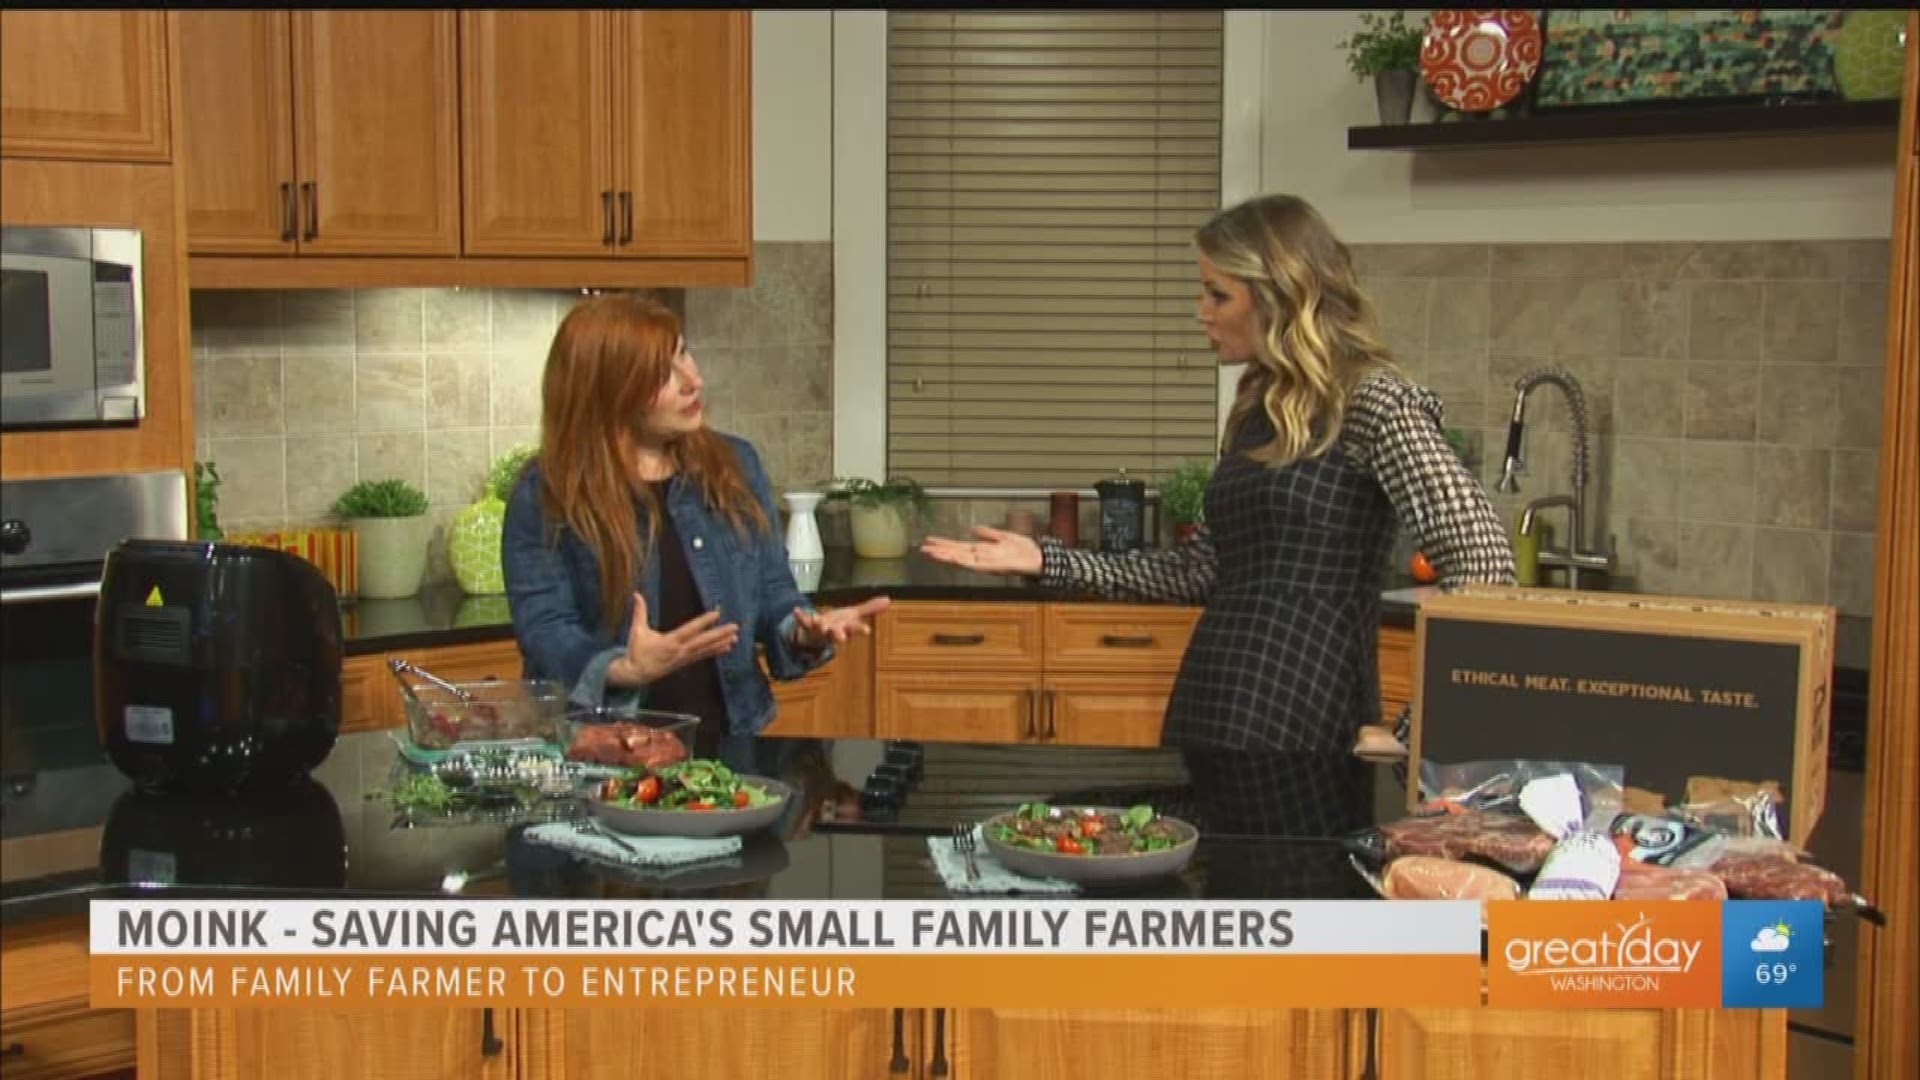 Lucinda Cramsey impressed the investors on the hit show Shark Tank and now her new business, Moink, aims to save America's small family farmers.